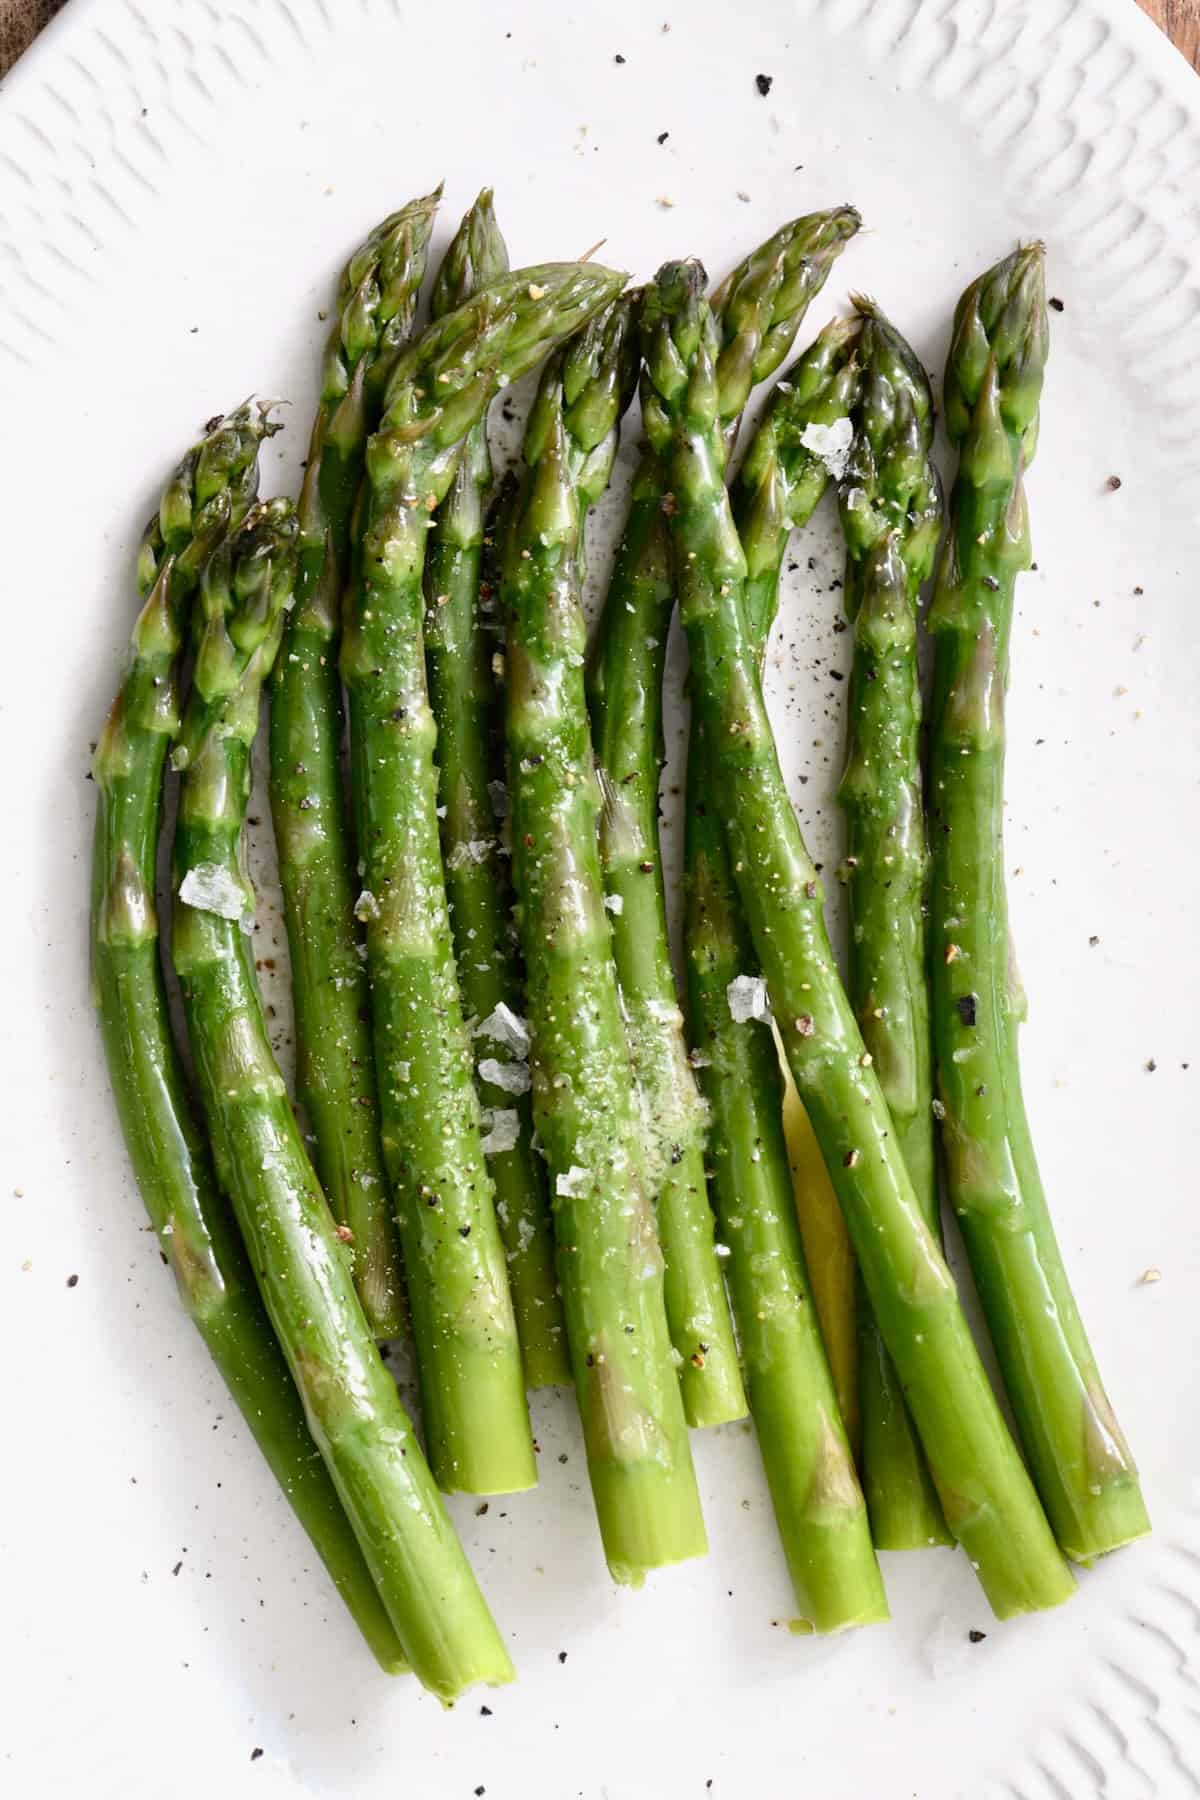 Cooked asparagus topped with salt on a plate